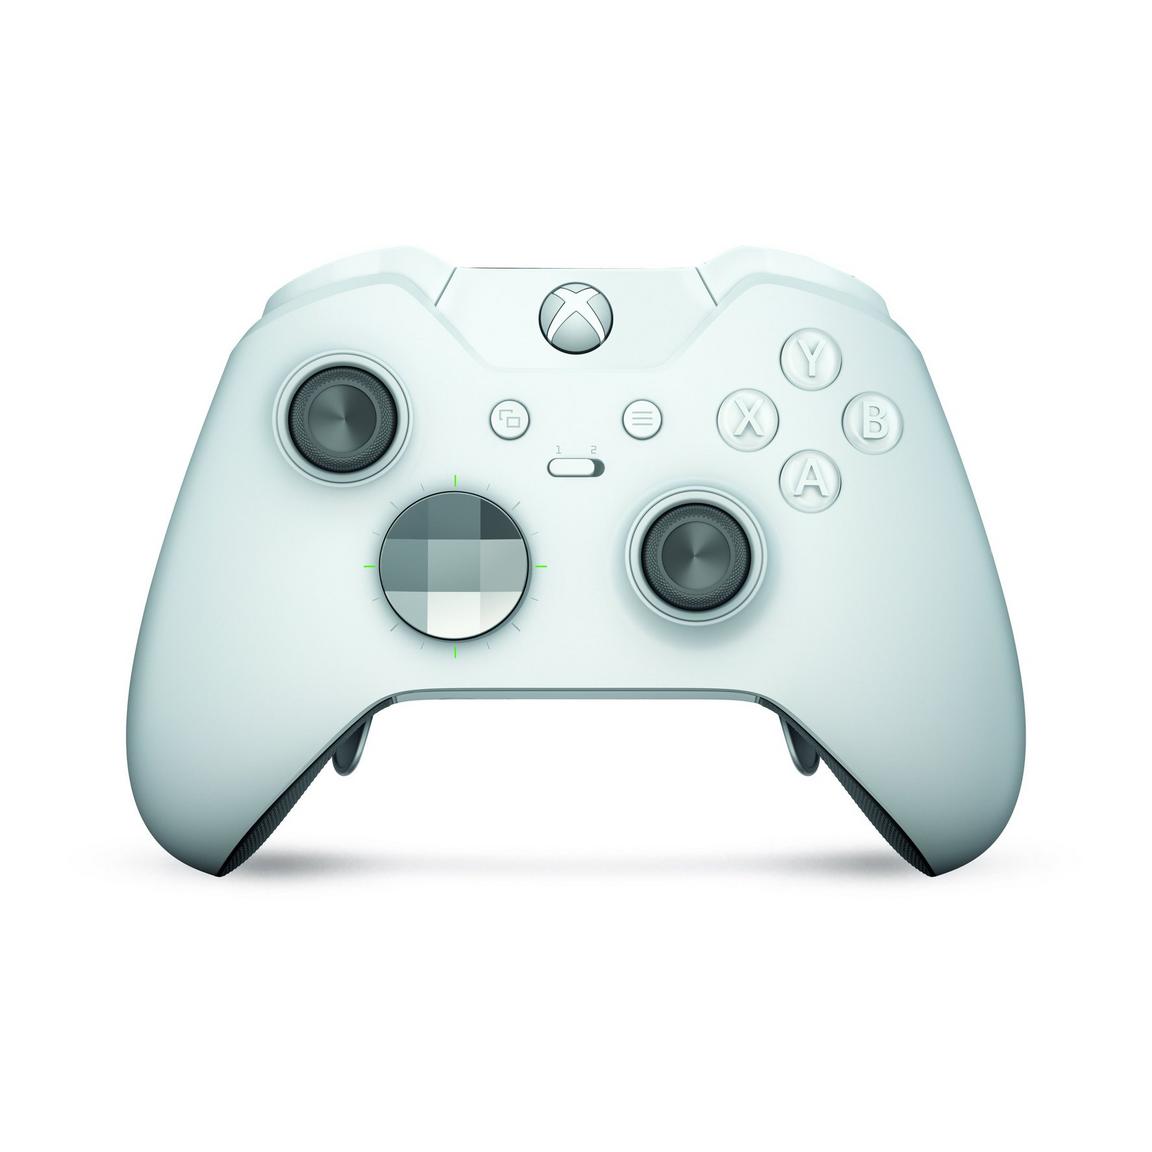 Shop Xbox Elite Wireless Controller Series 2 from Microsoft on Openhaus